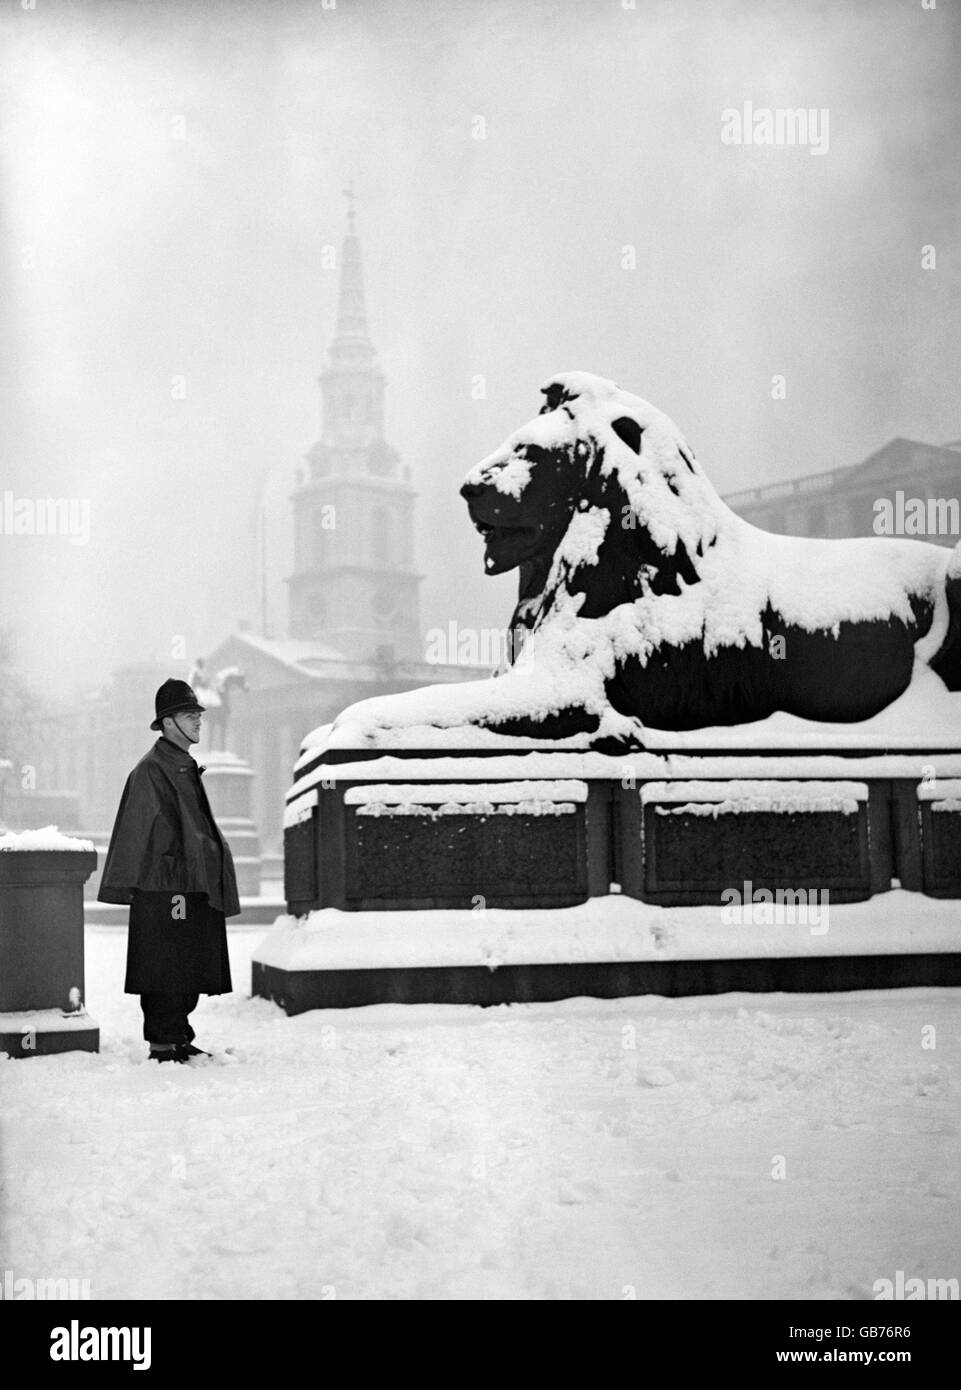 A policeman looks at one of the lions of Nelson's Column covered in a layer of snow, after a heavy snowfall in London. Stock Photo